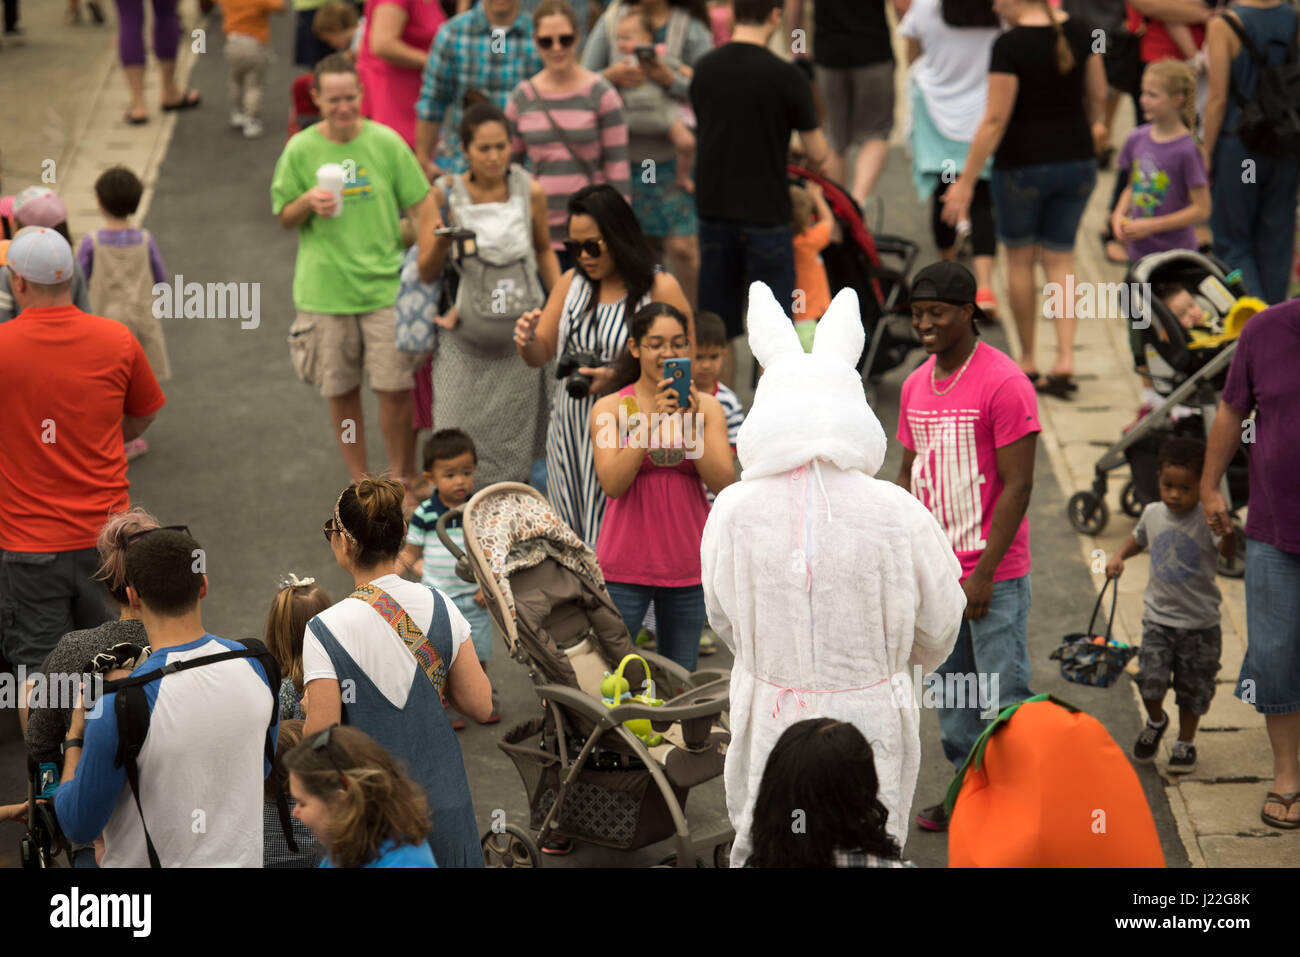 Crowds of families surround an Easter Rabbit for photos during Eggsplosion April 15, 2017, at Kadena Air Base, Japan. Several volunteers dressed up as action heroes, rabbits and carrots during the event. (U.S. Air Force photo by Senior Airman Omari Bernard/Released) Stock Photo